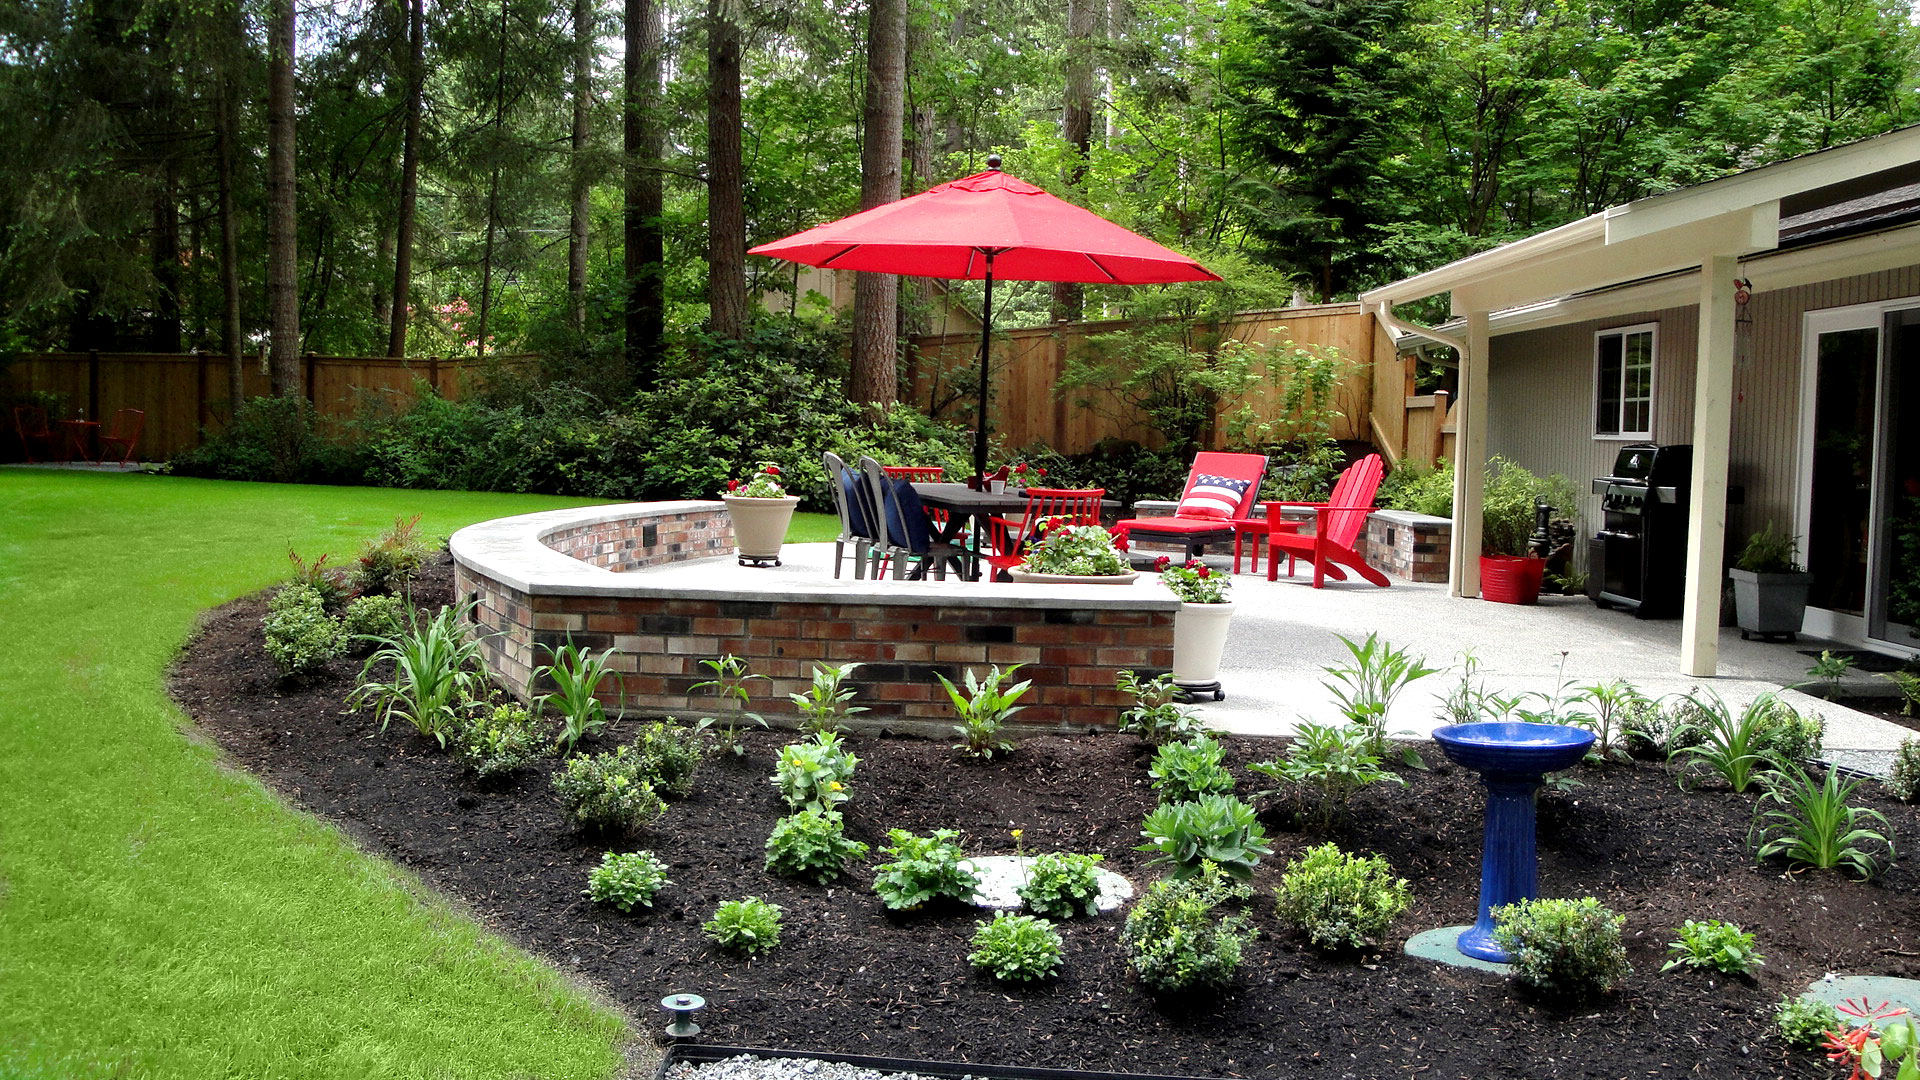 Grina Landscape Design Gig Harbor featuring a red umbrella on the patio and surrounding landscaping